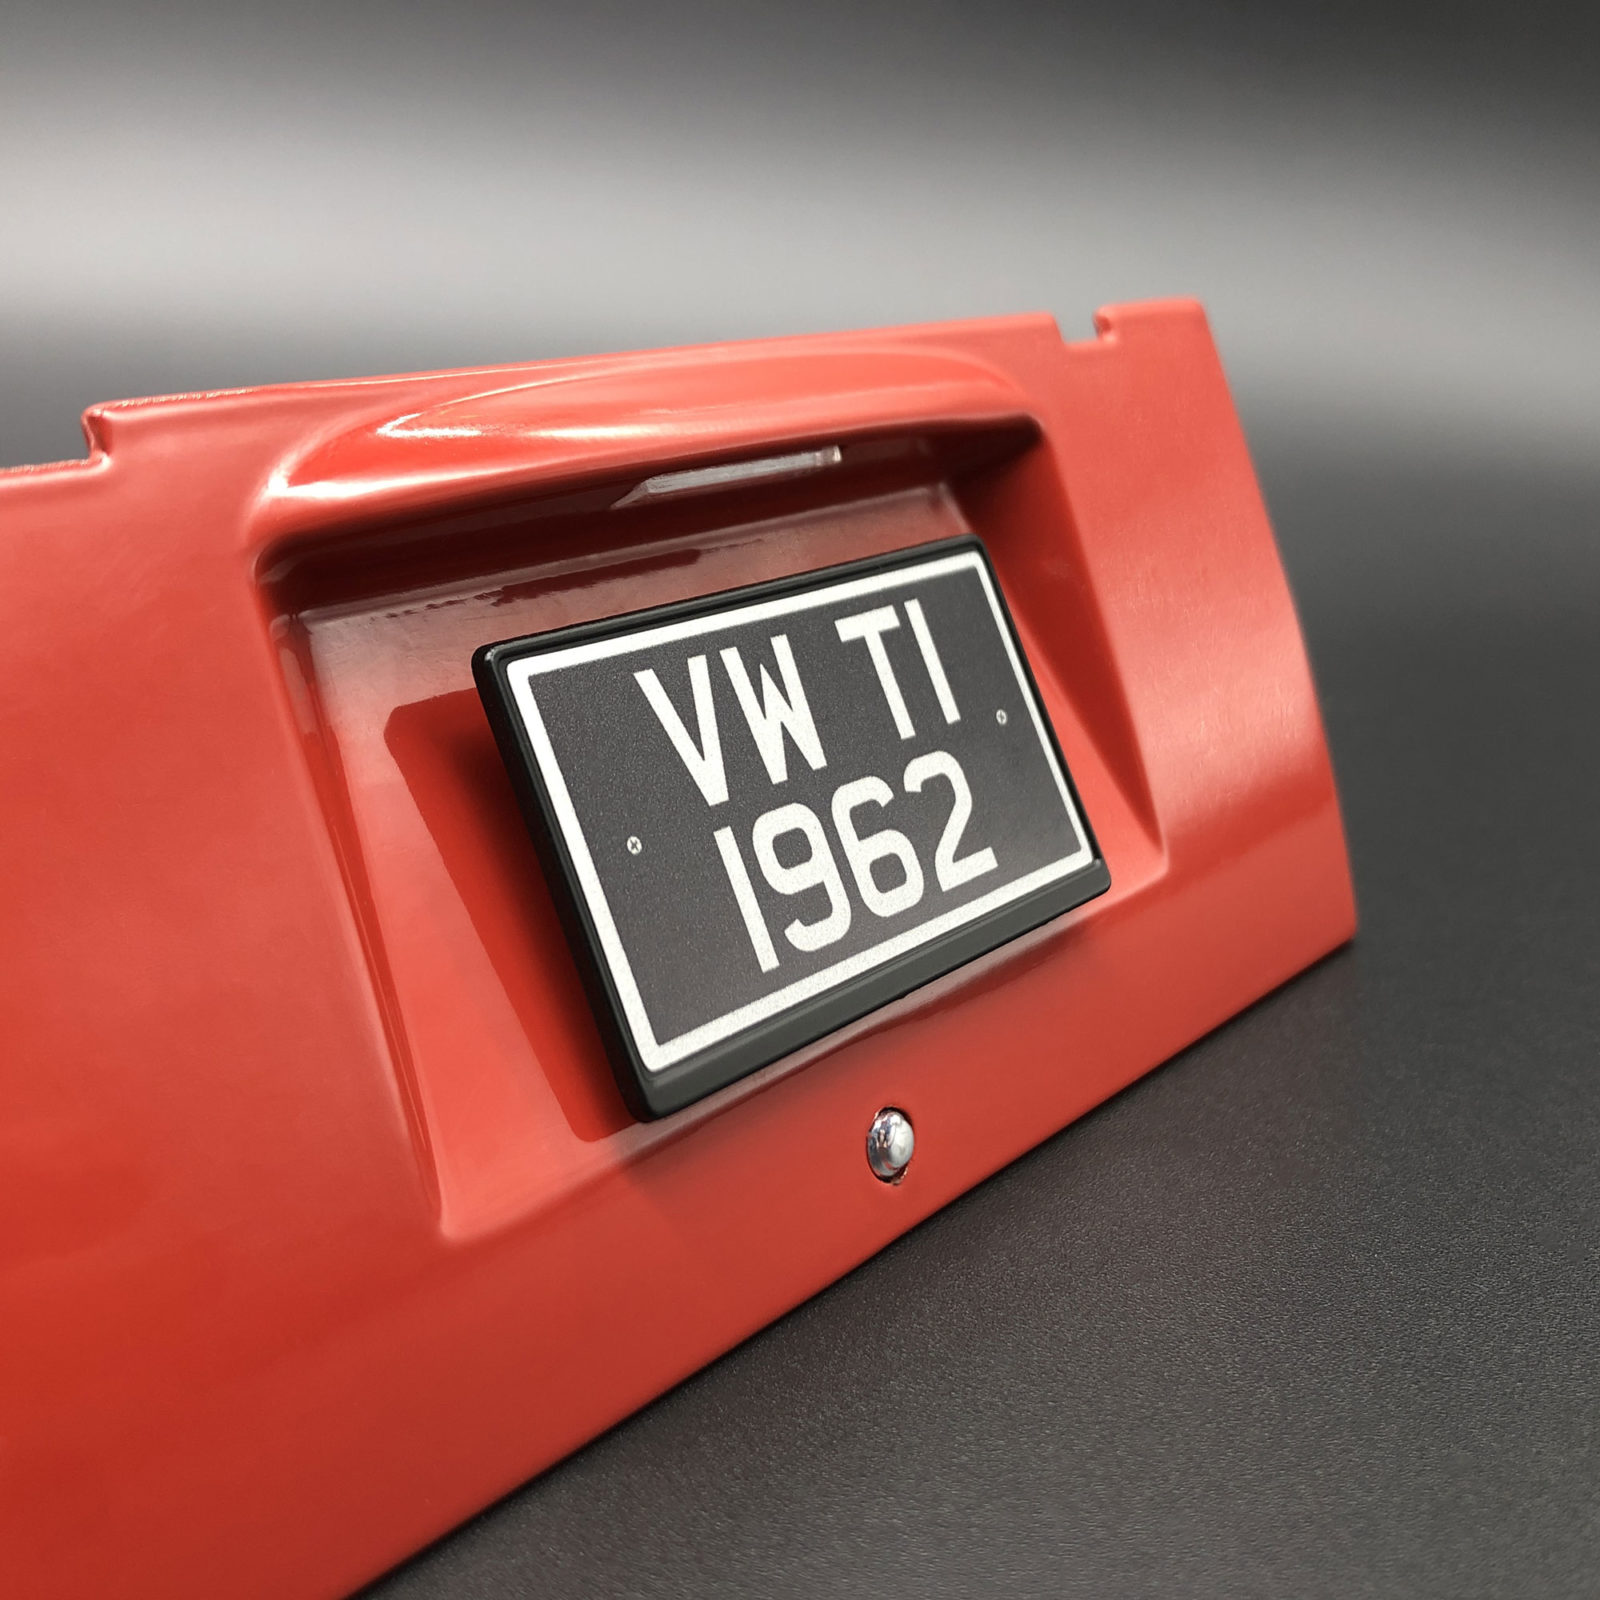 Mod to update existing VW T1 1962 licence plate